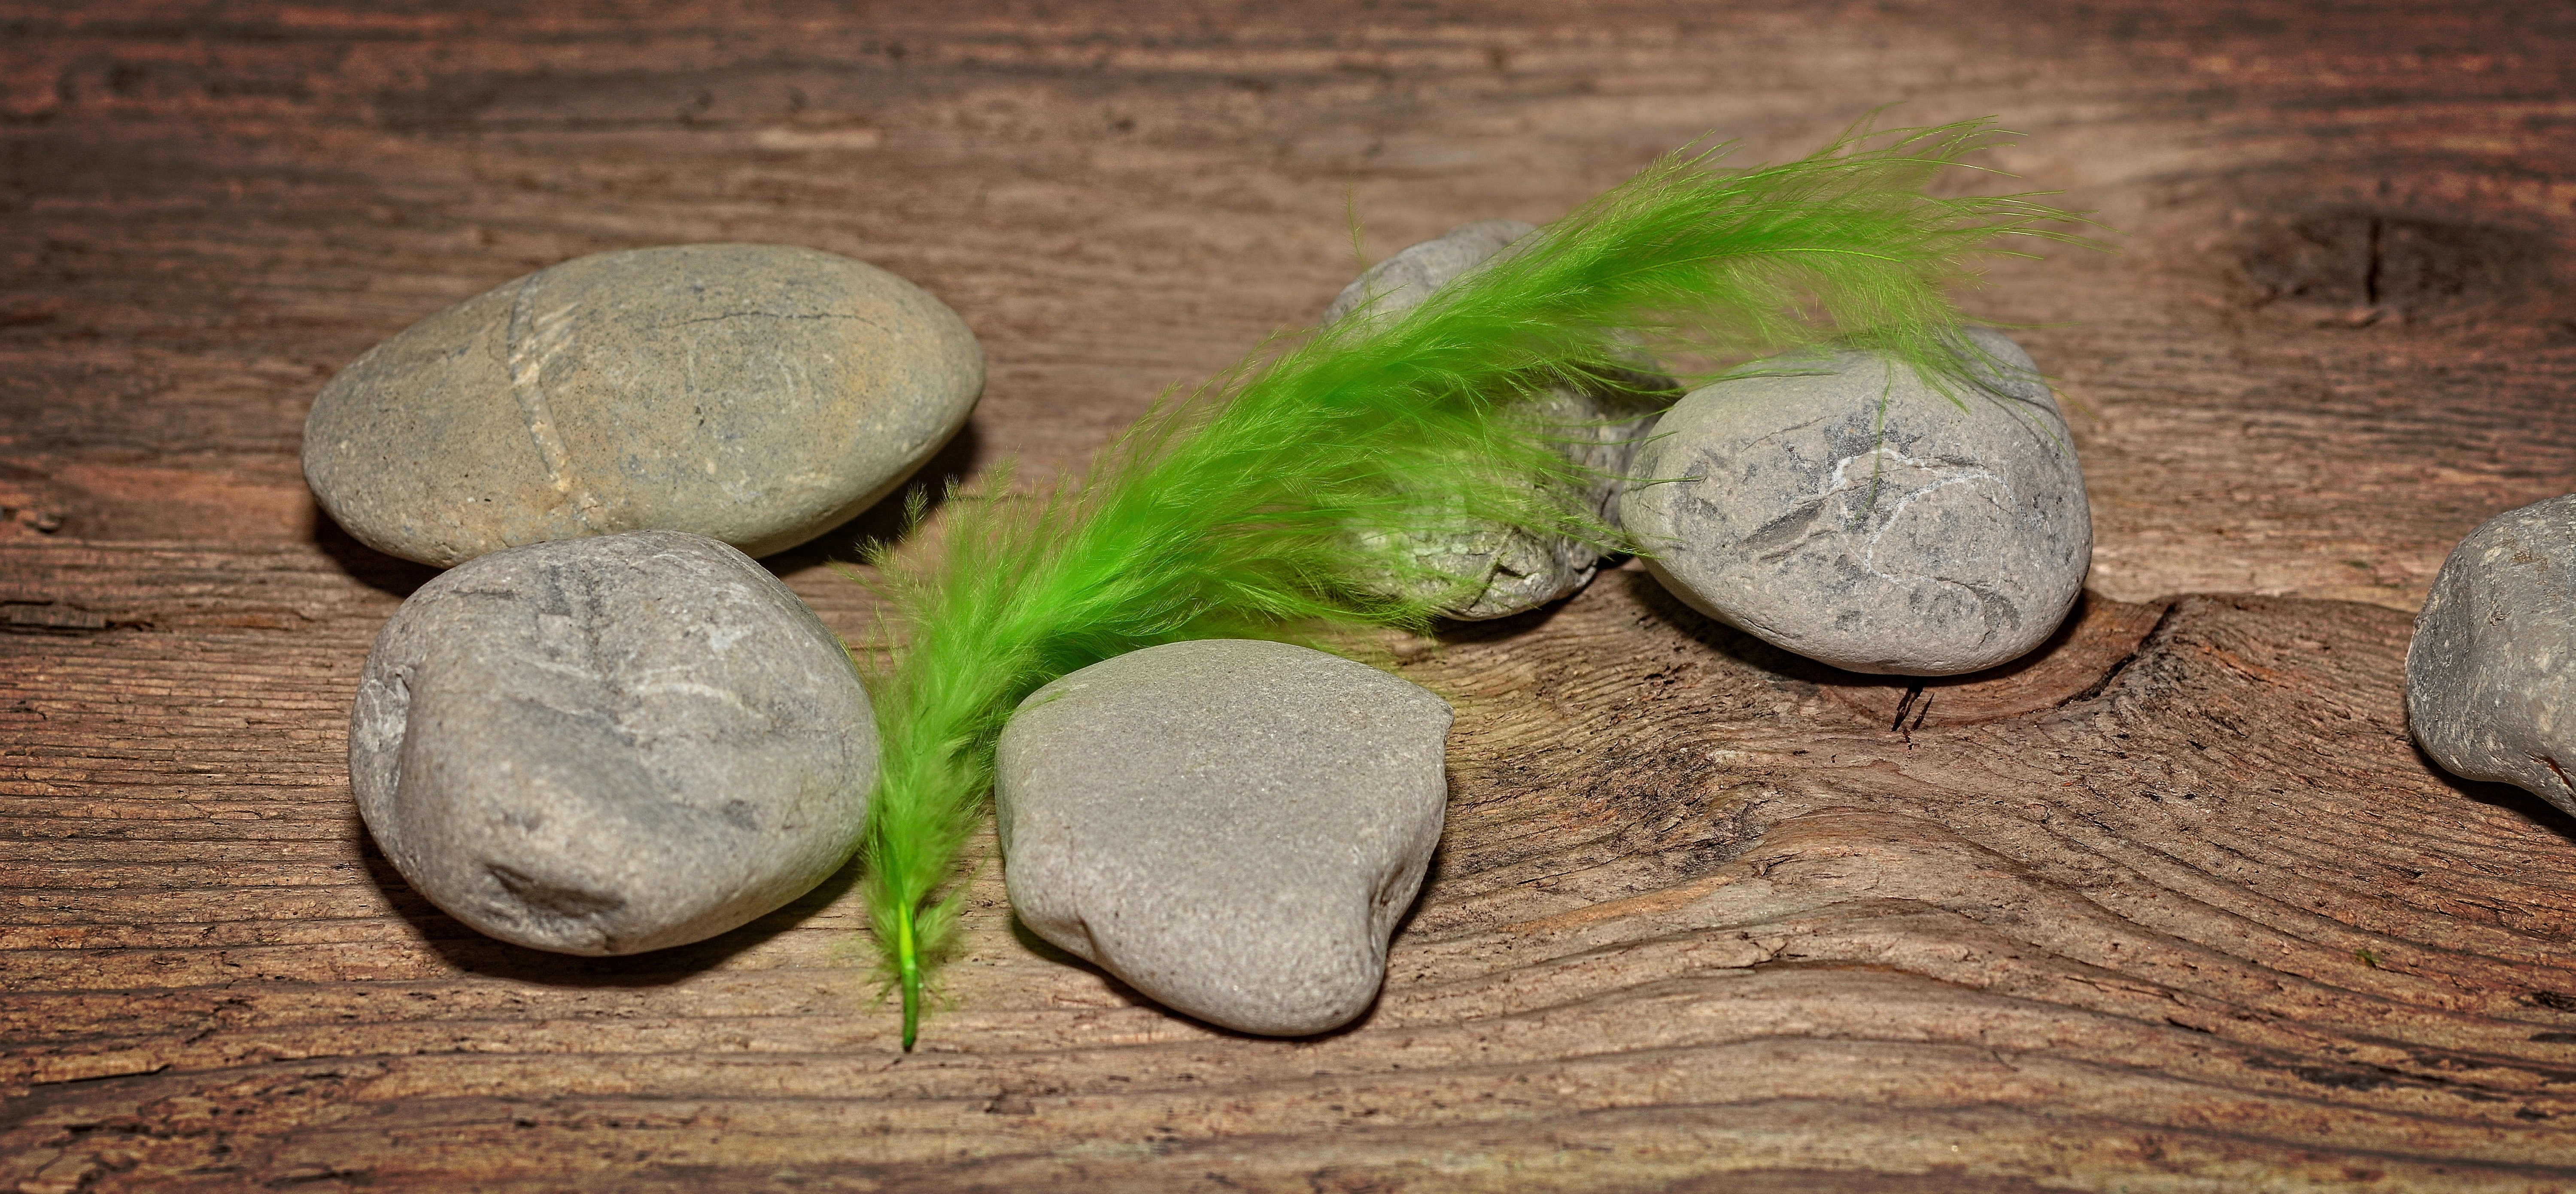 grey stone lot and green feather